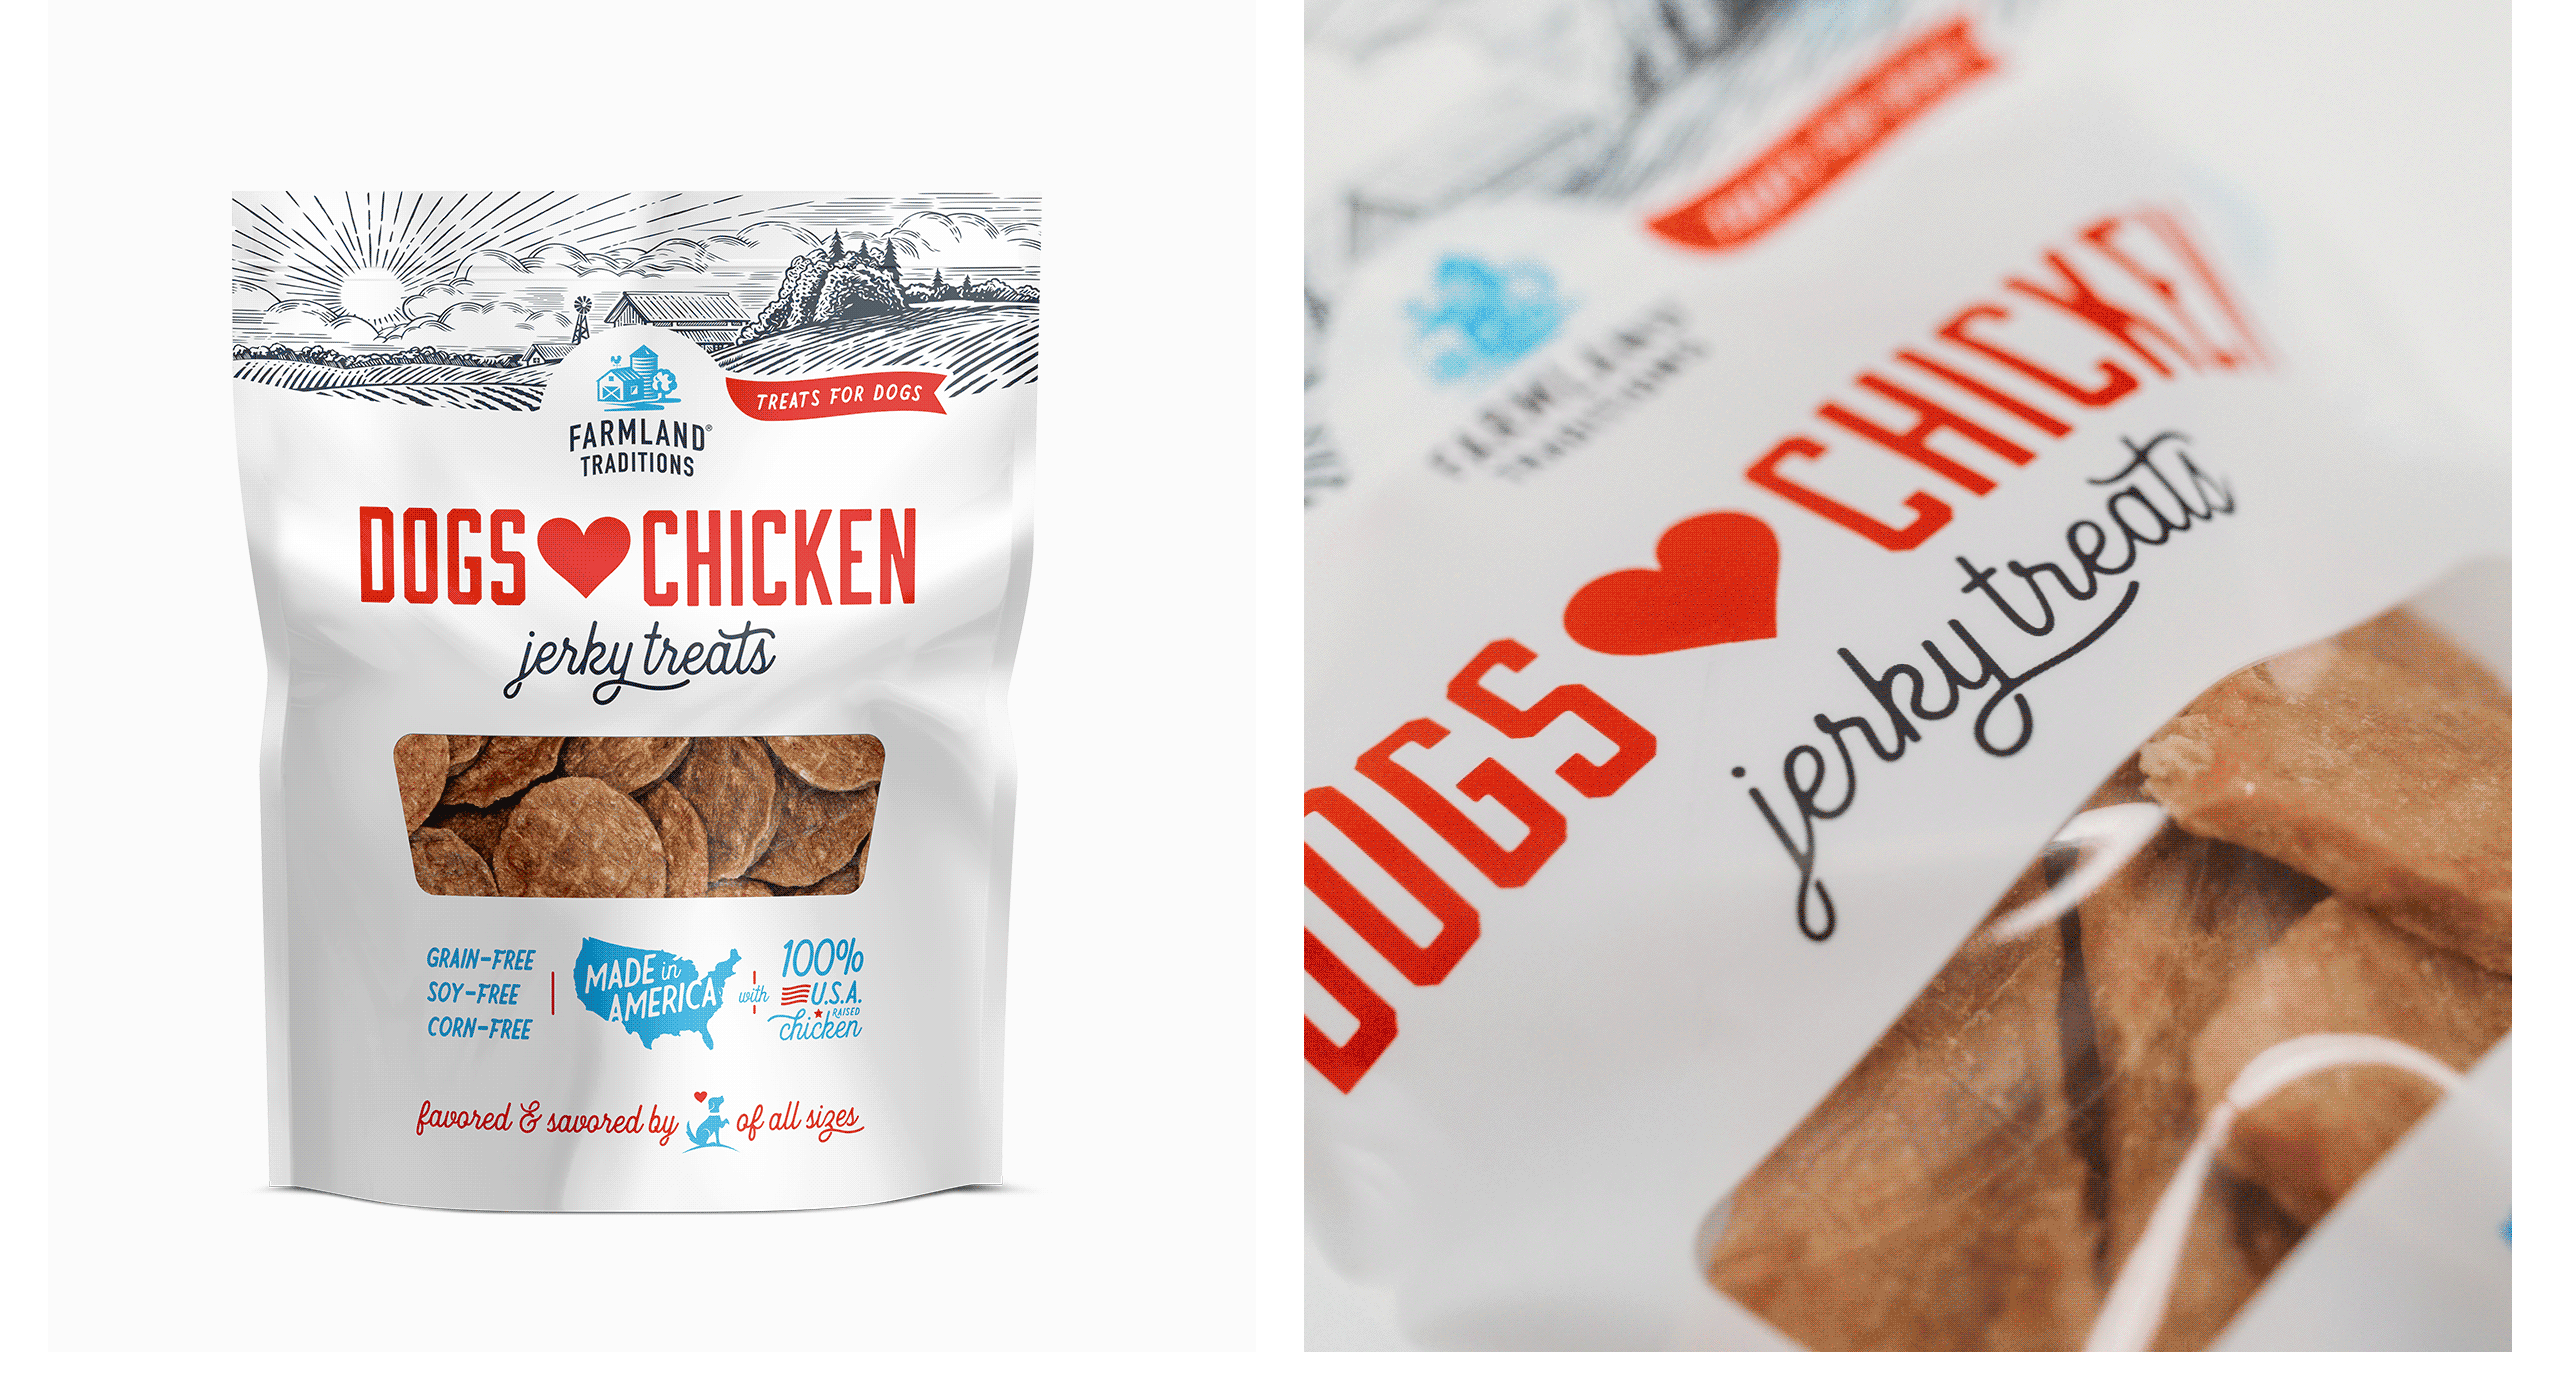 Dogs Heart Chicken jerky treats packaging images